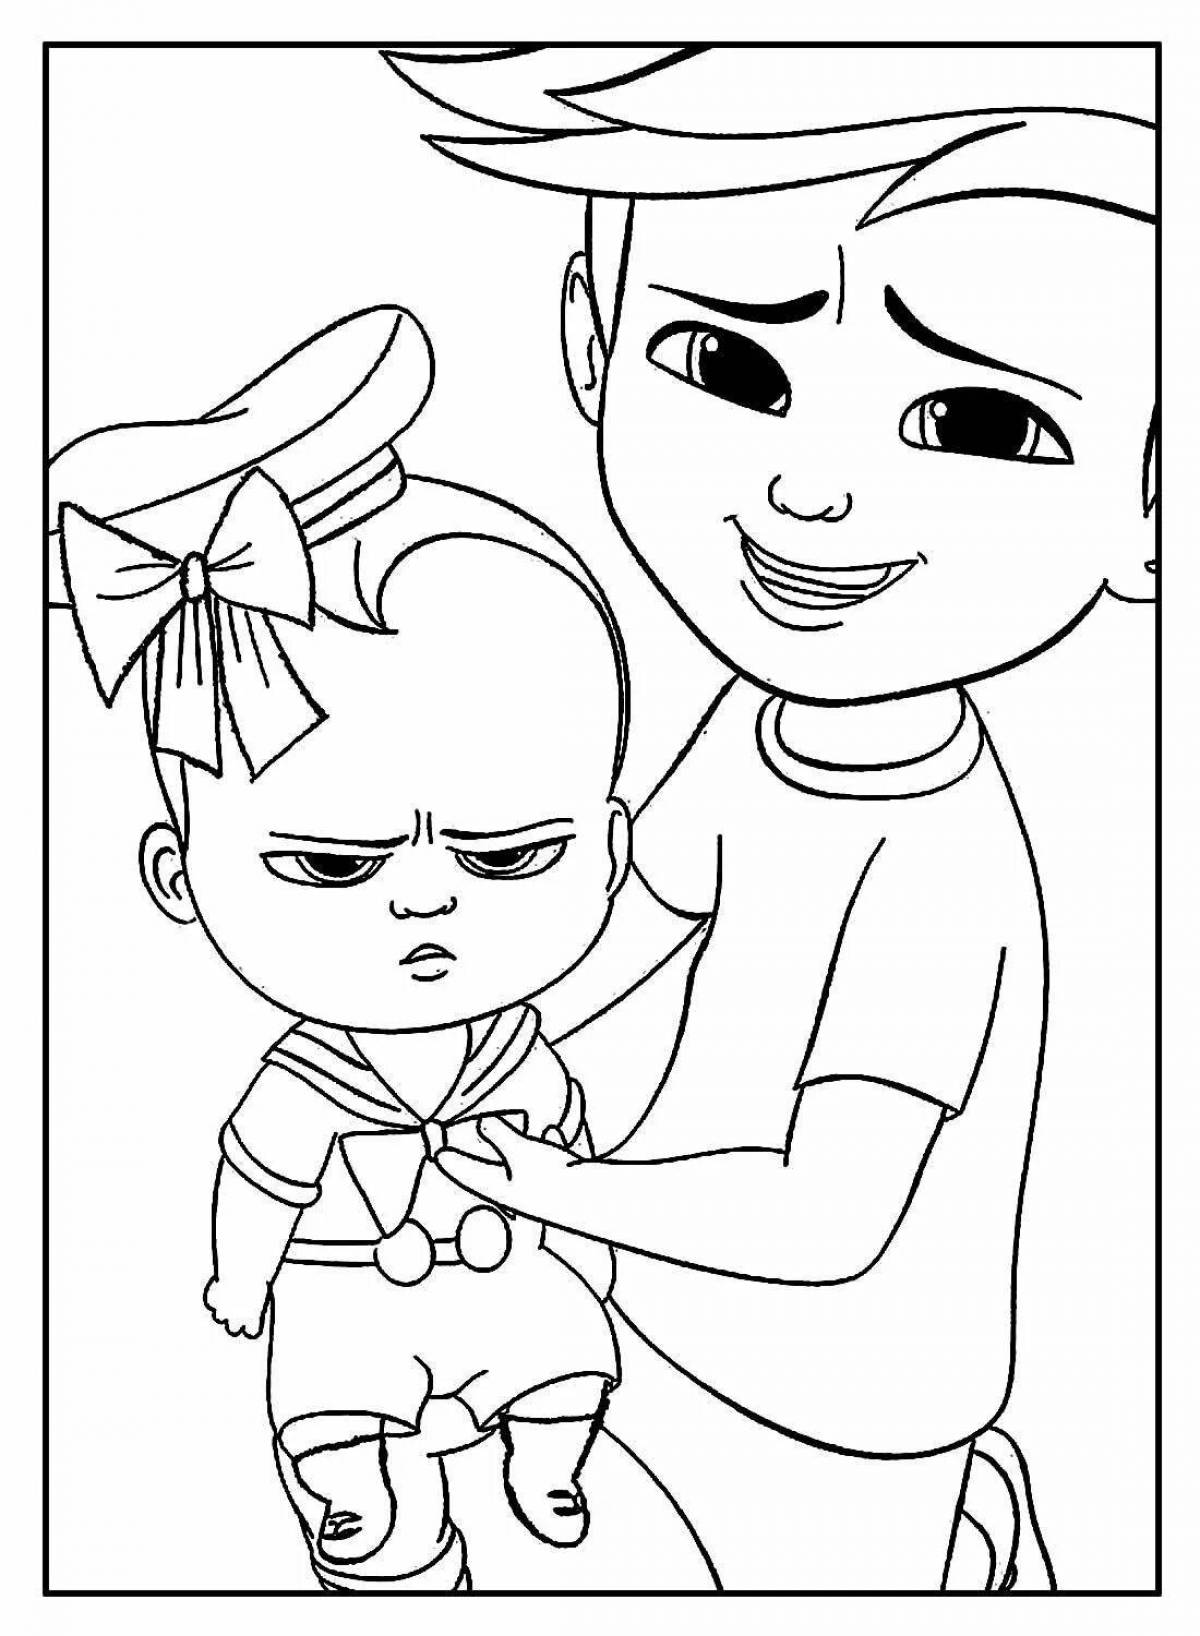 Great boss coloring page